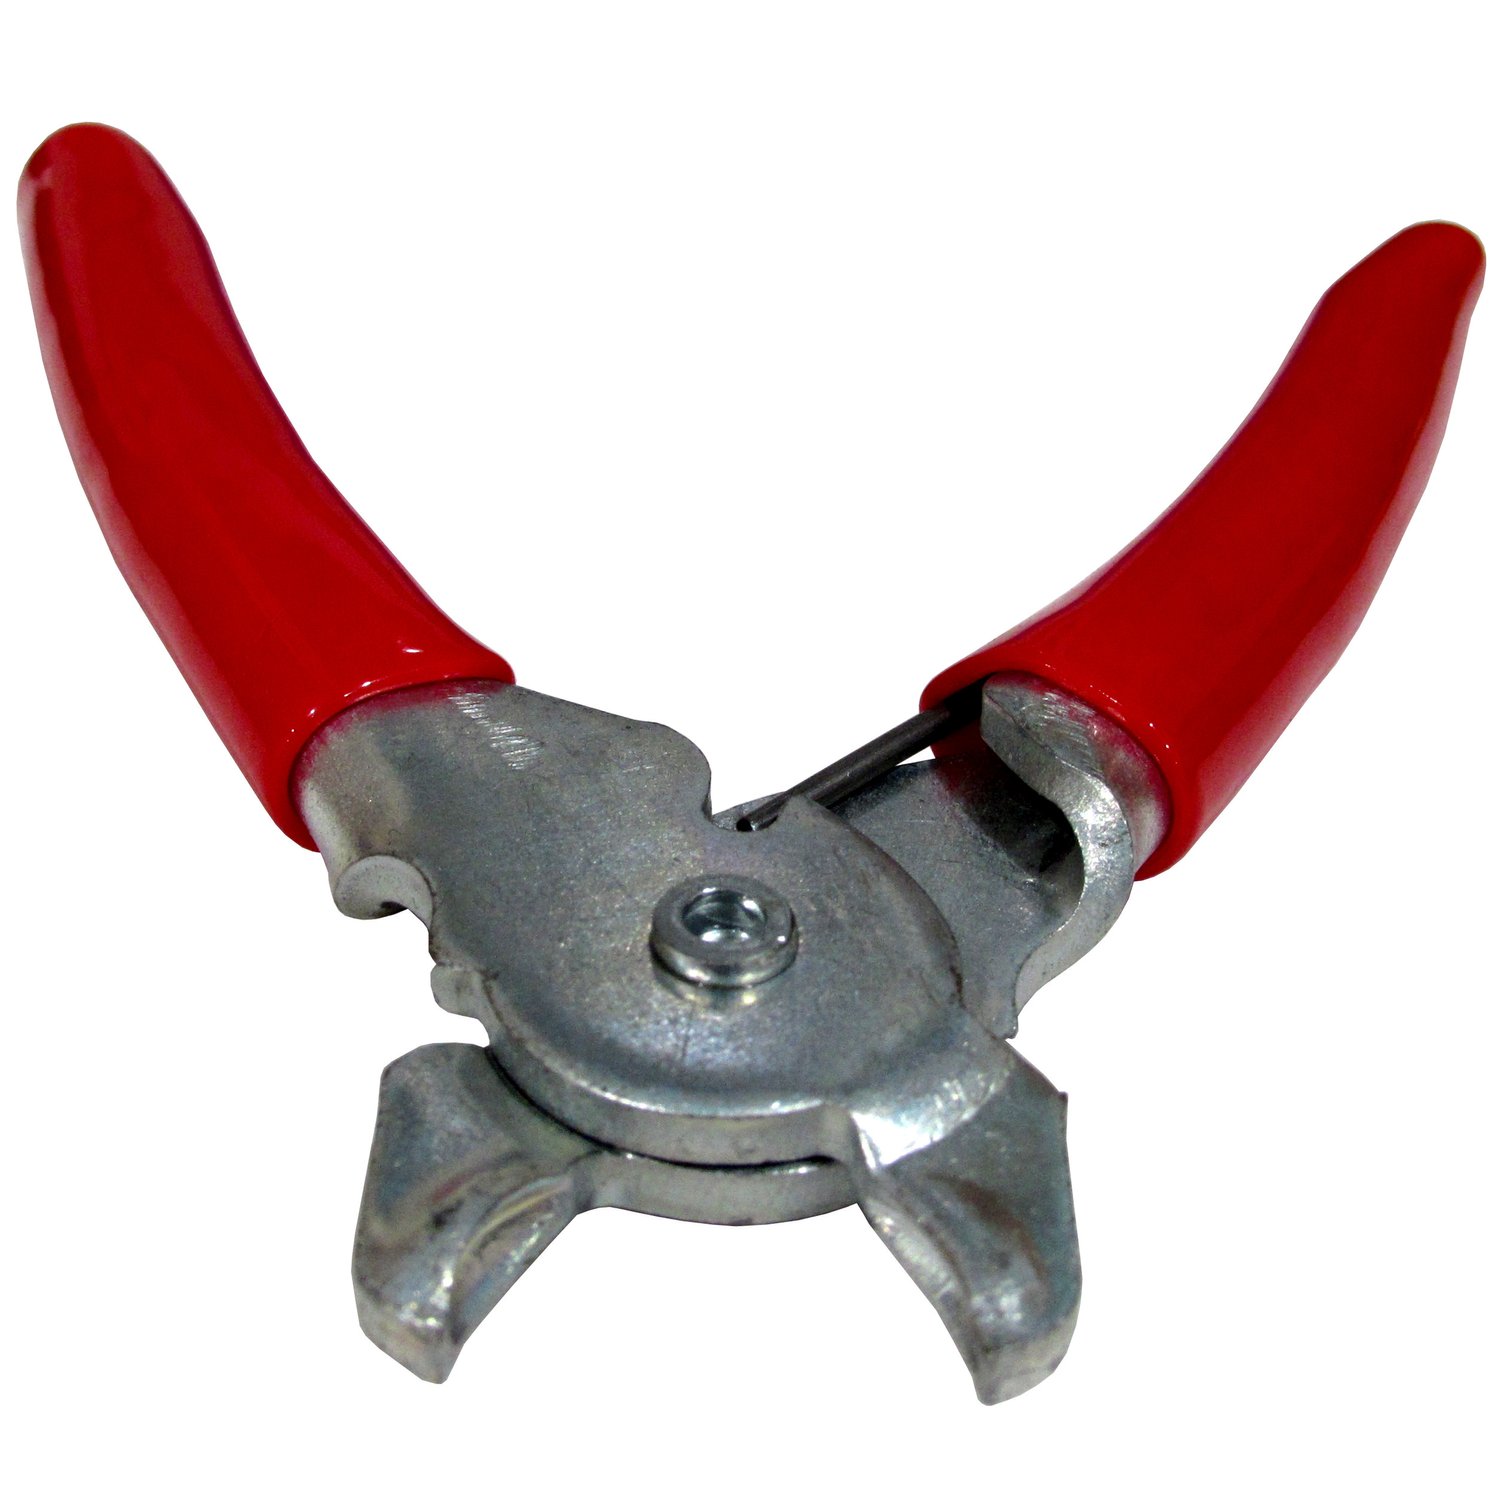 Hog Ring Pliers  fastening netting down on the top of your pens